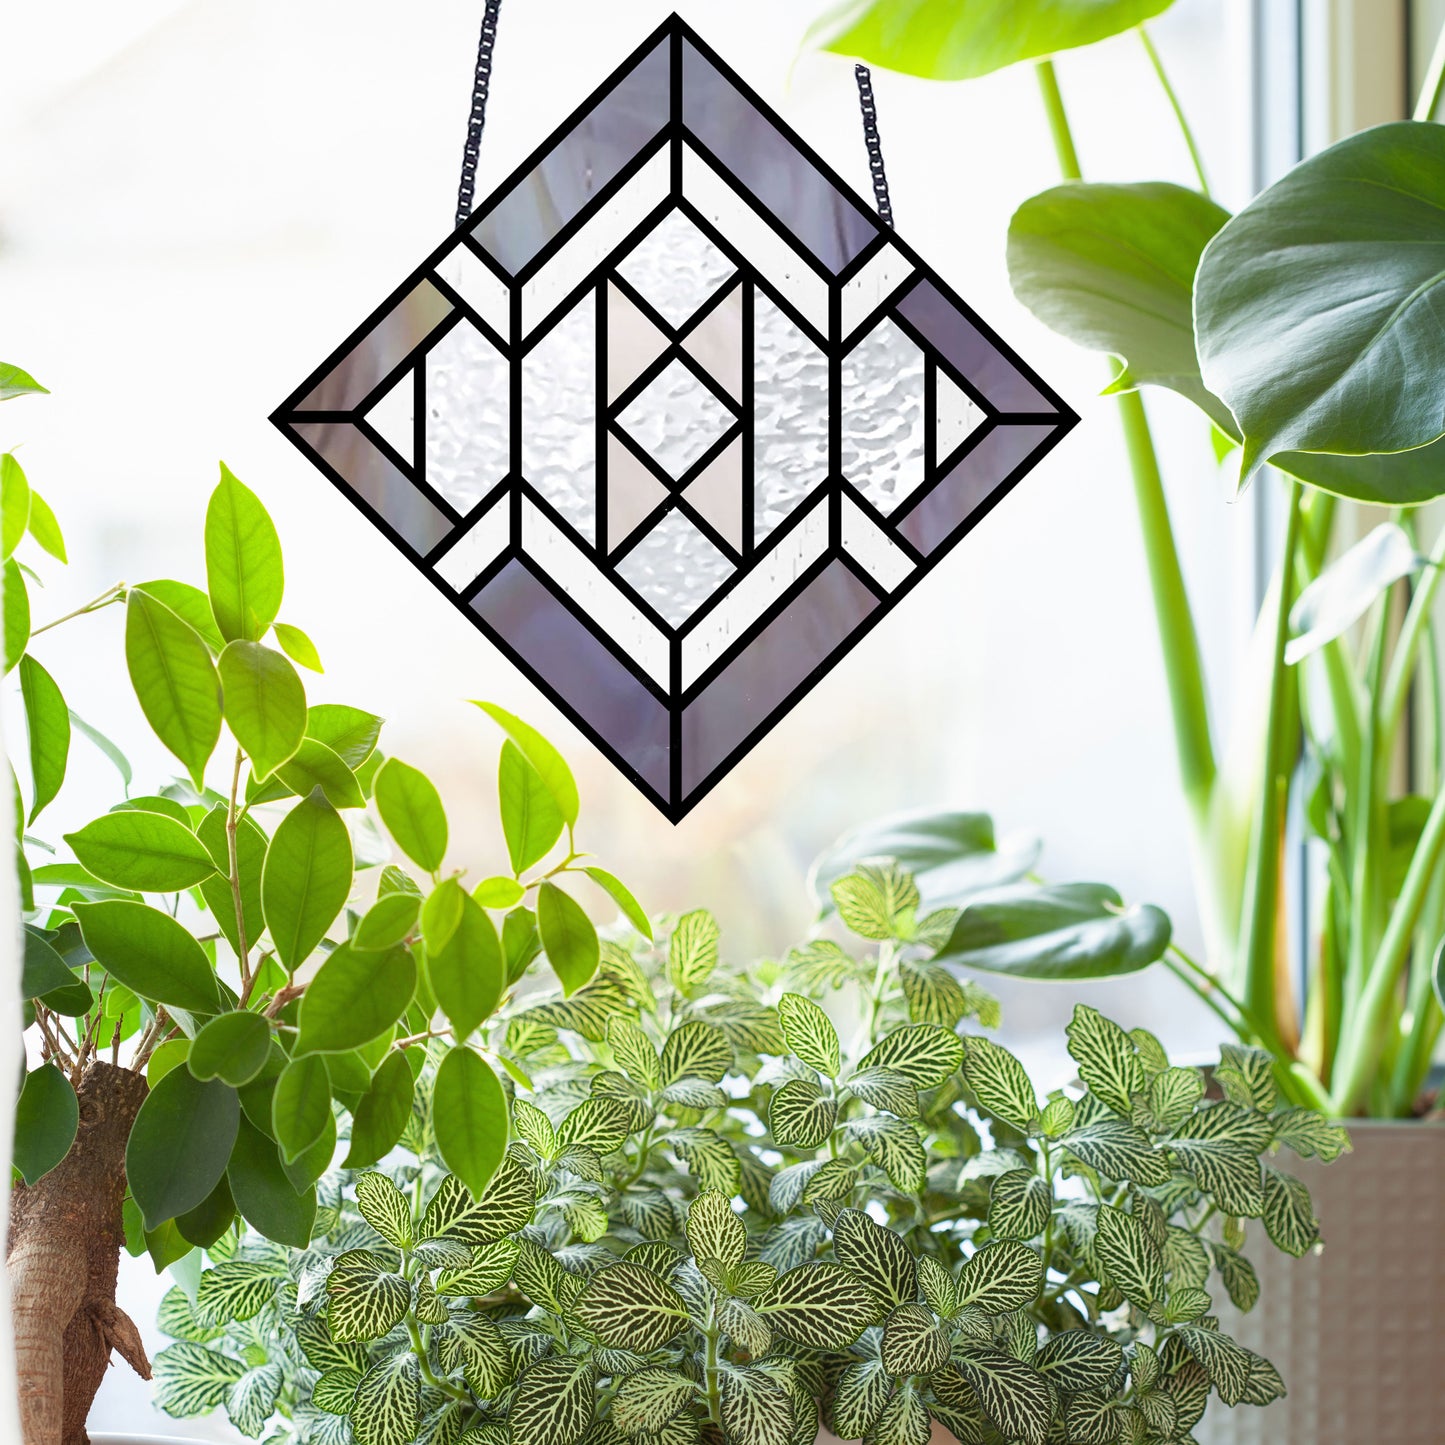 Beginner stained glass pattern for a diamond, instant PDF download, shown hanging in a window with plants